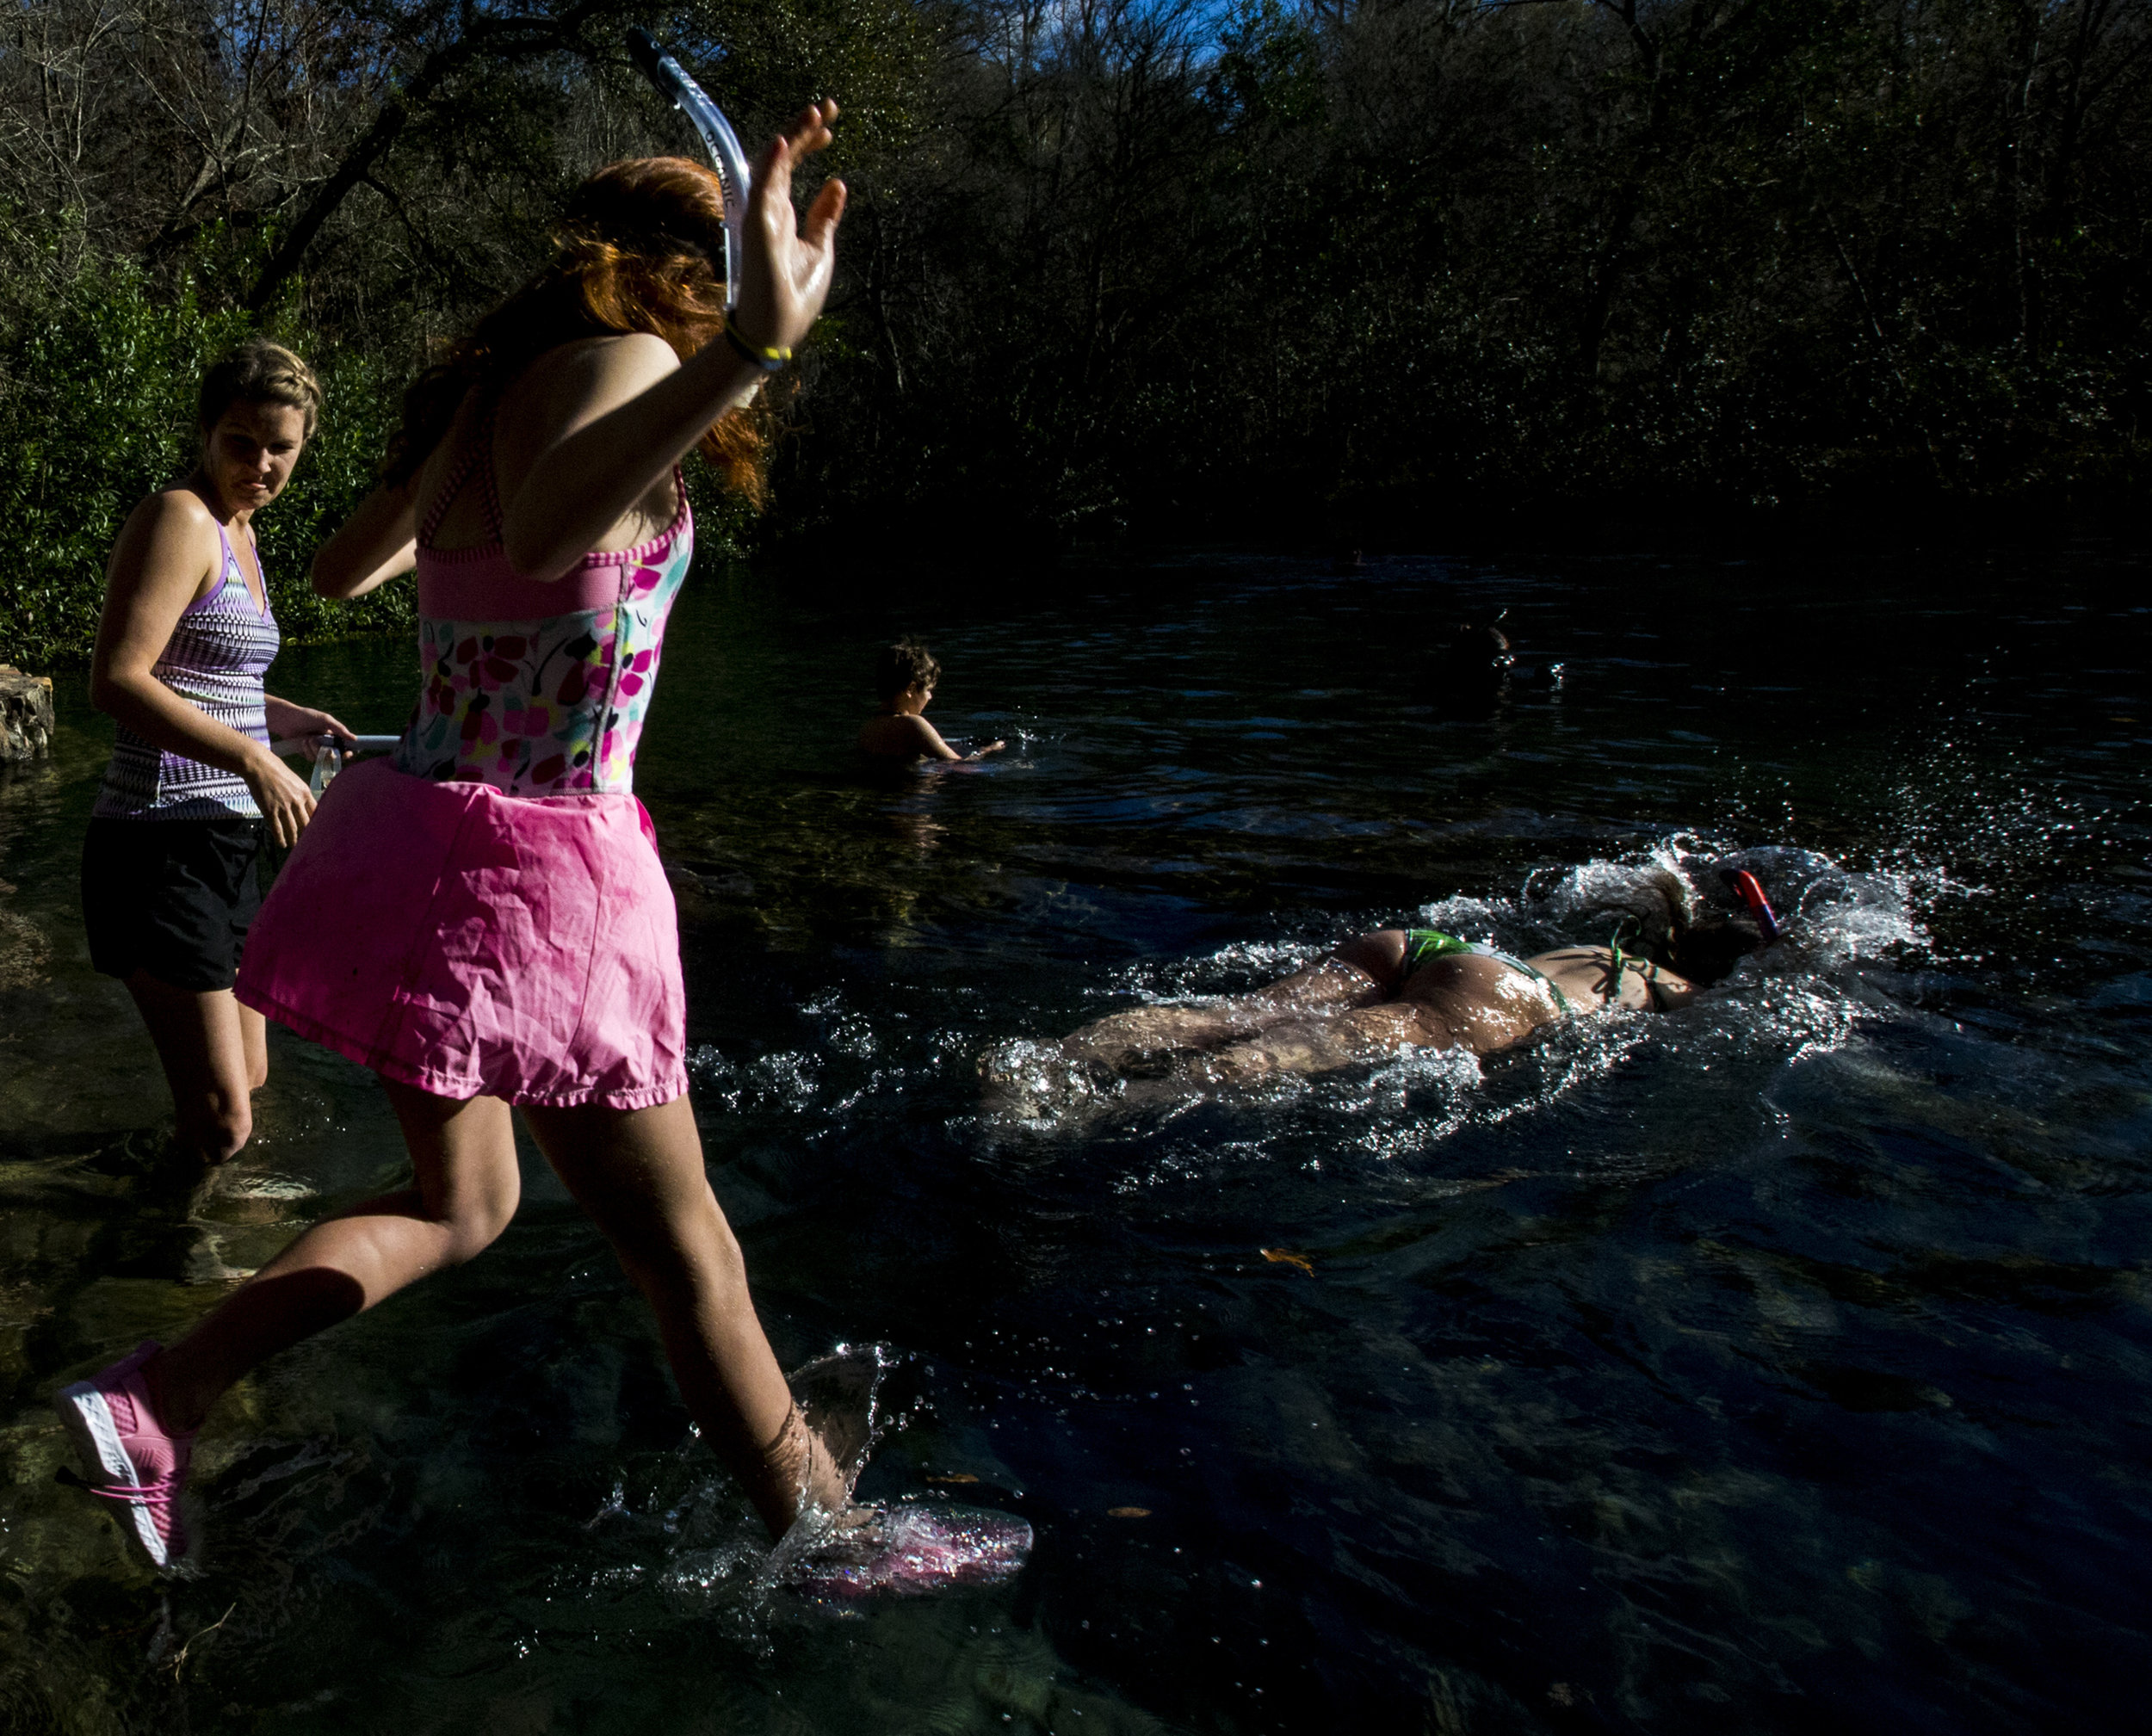  People jump into the springs during the Iche Nippy Dip Day at Ichetucknee Springs State Park on January 5, 2019. The annual January jump is to raise money for Relay for Life and Friends of Ichetucknee Springs State Park. 